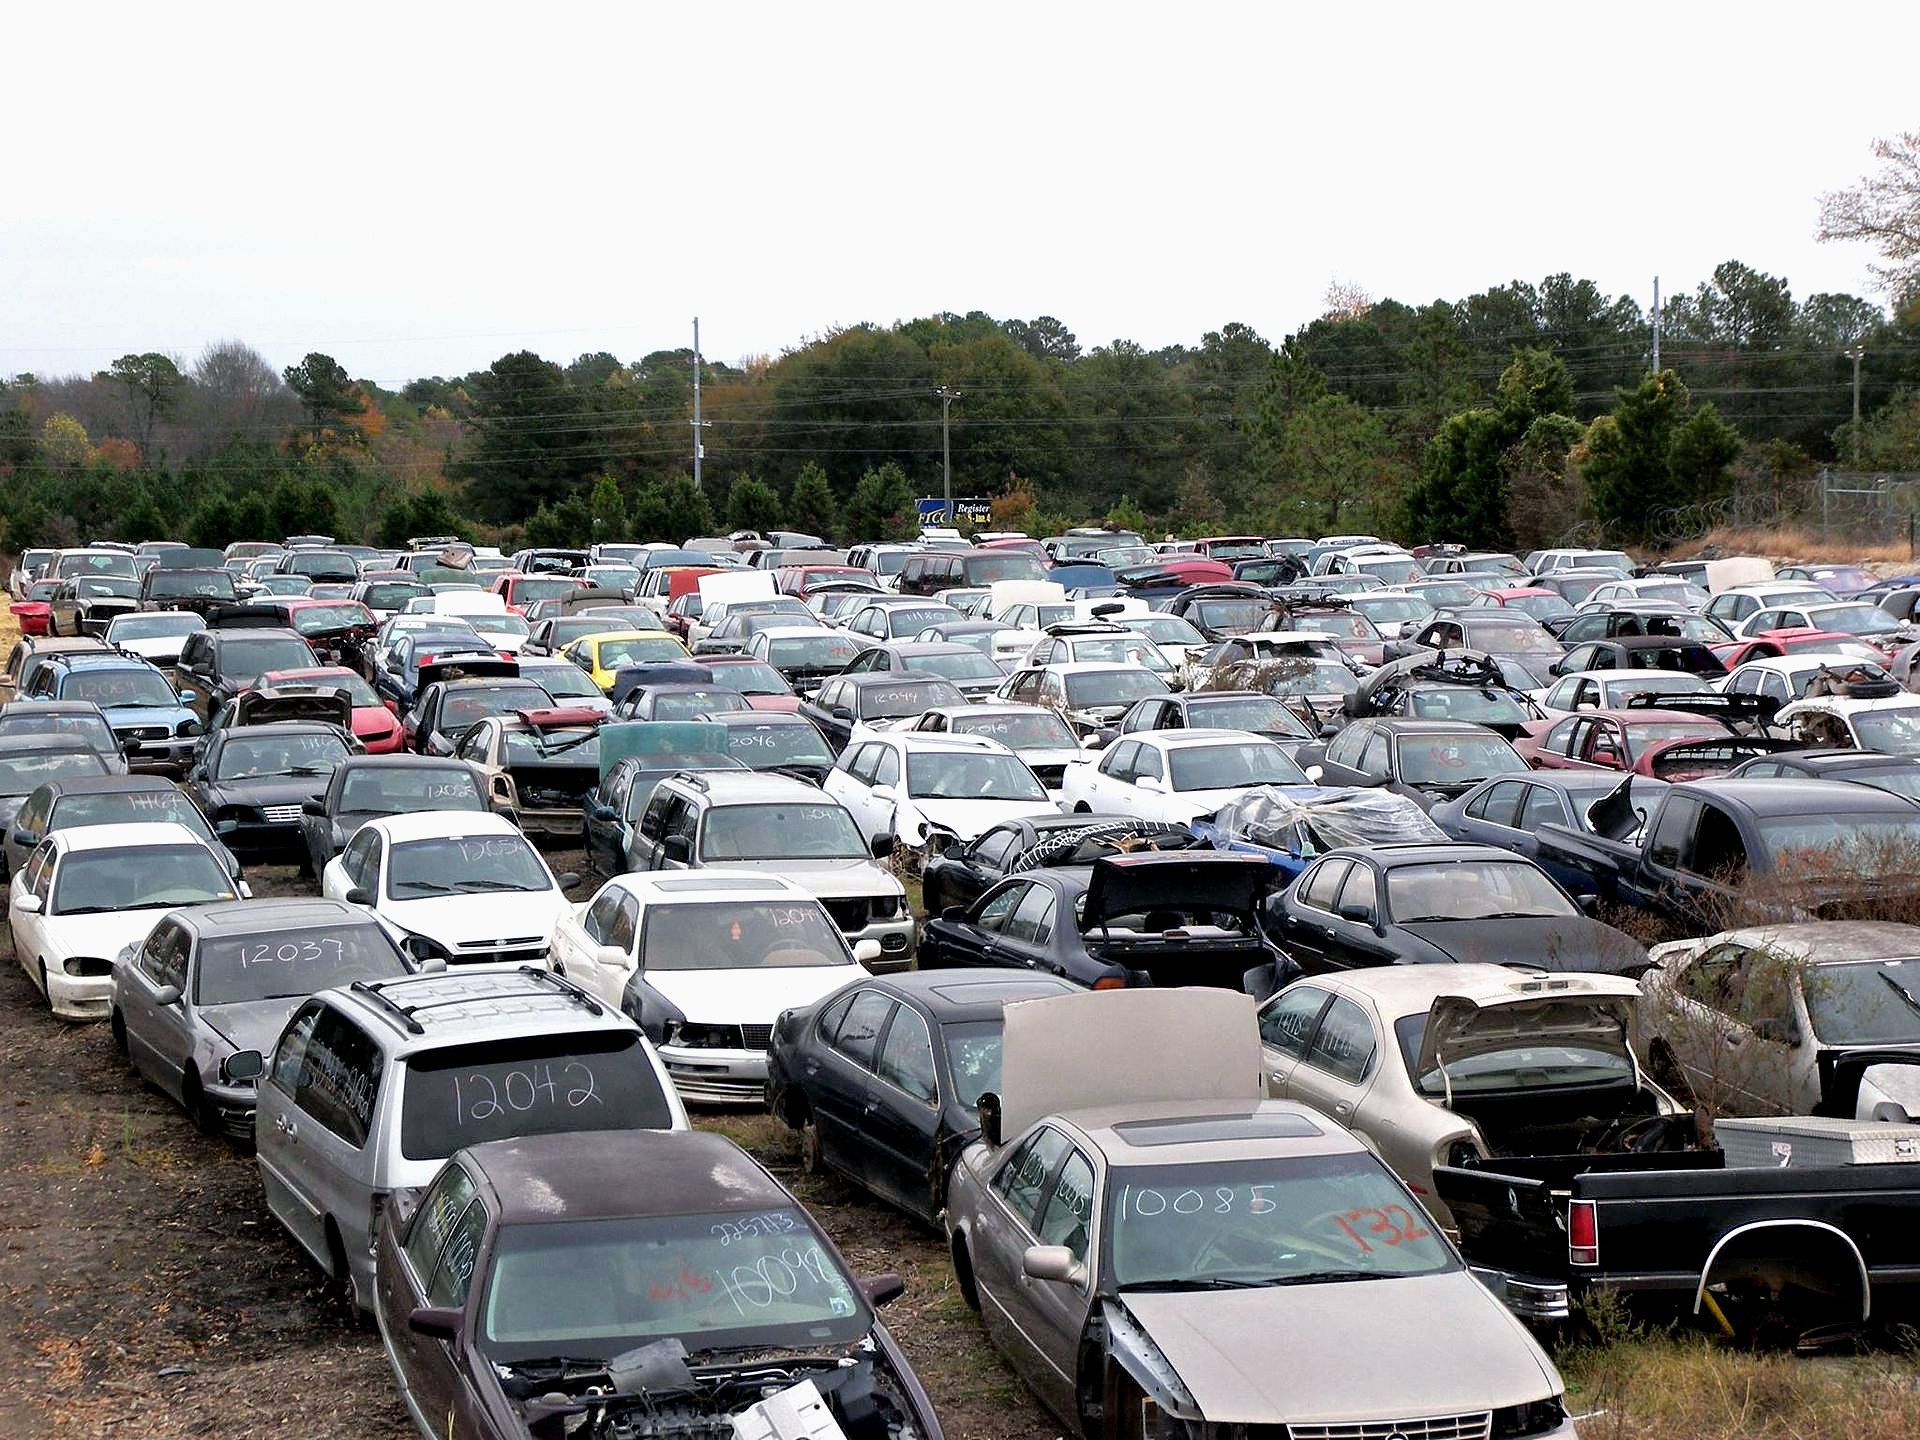 A large parking lot filled with lots of cars and trucks